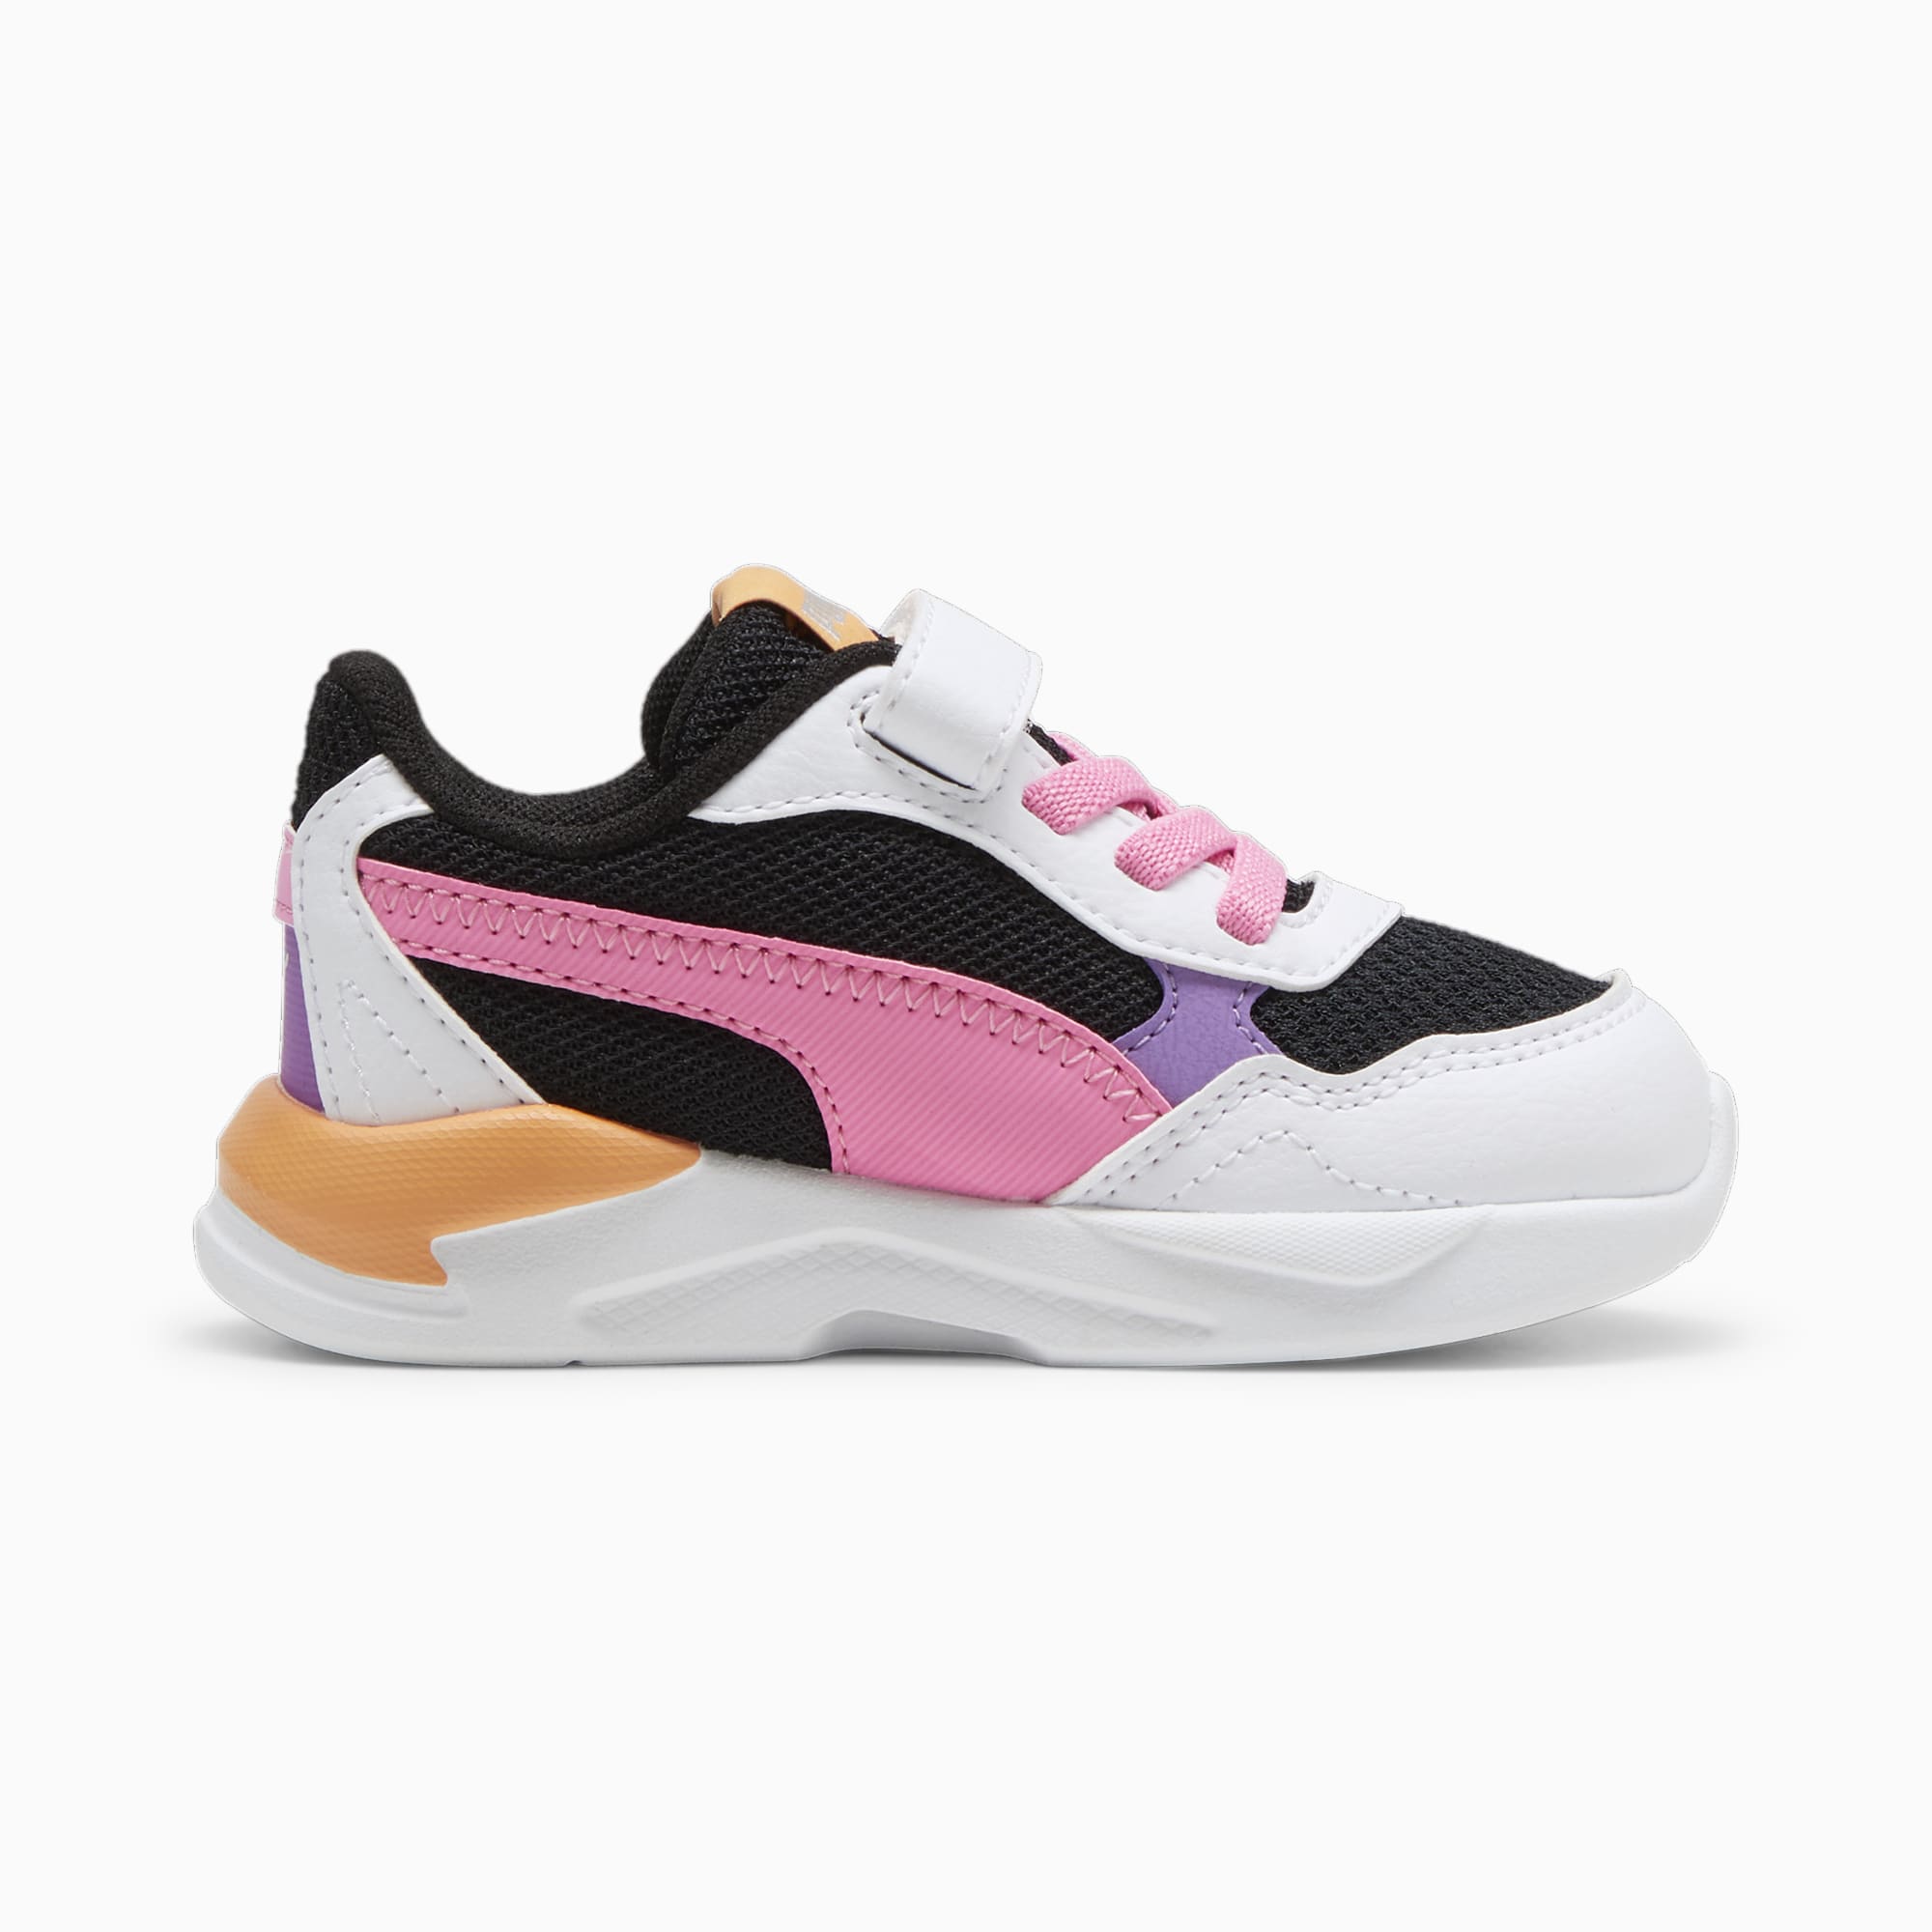 PUMA X-Ray Speed Lite AC Babies' Trainers, Black/Fast Pink/White, Size 19, Shoes